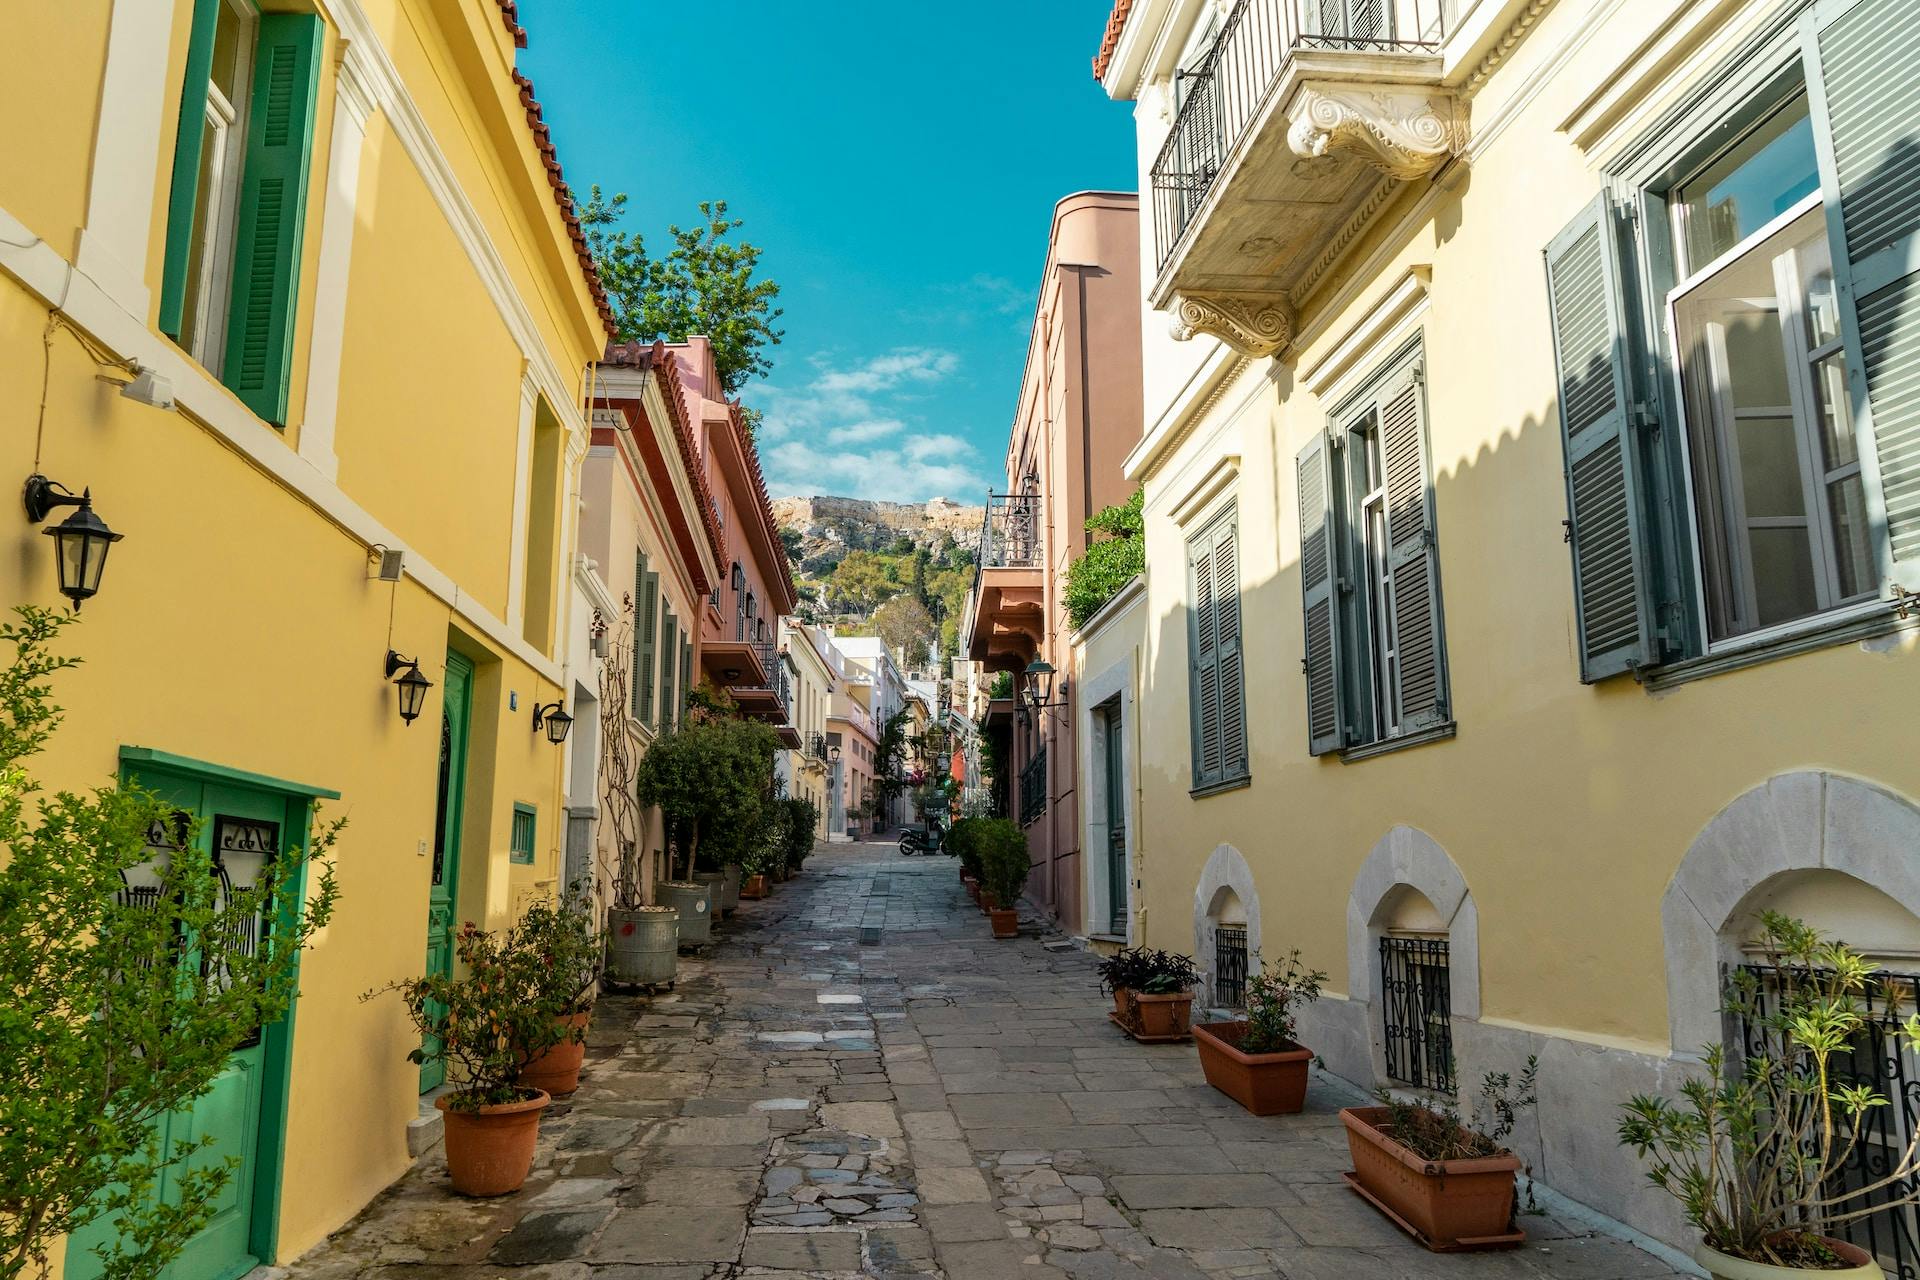 Discovering the Plaka district